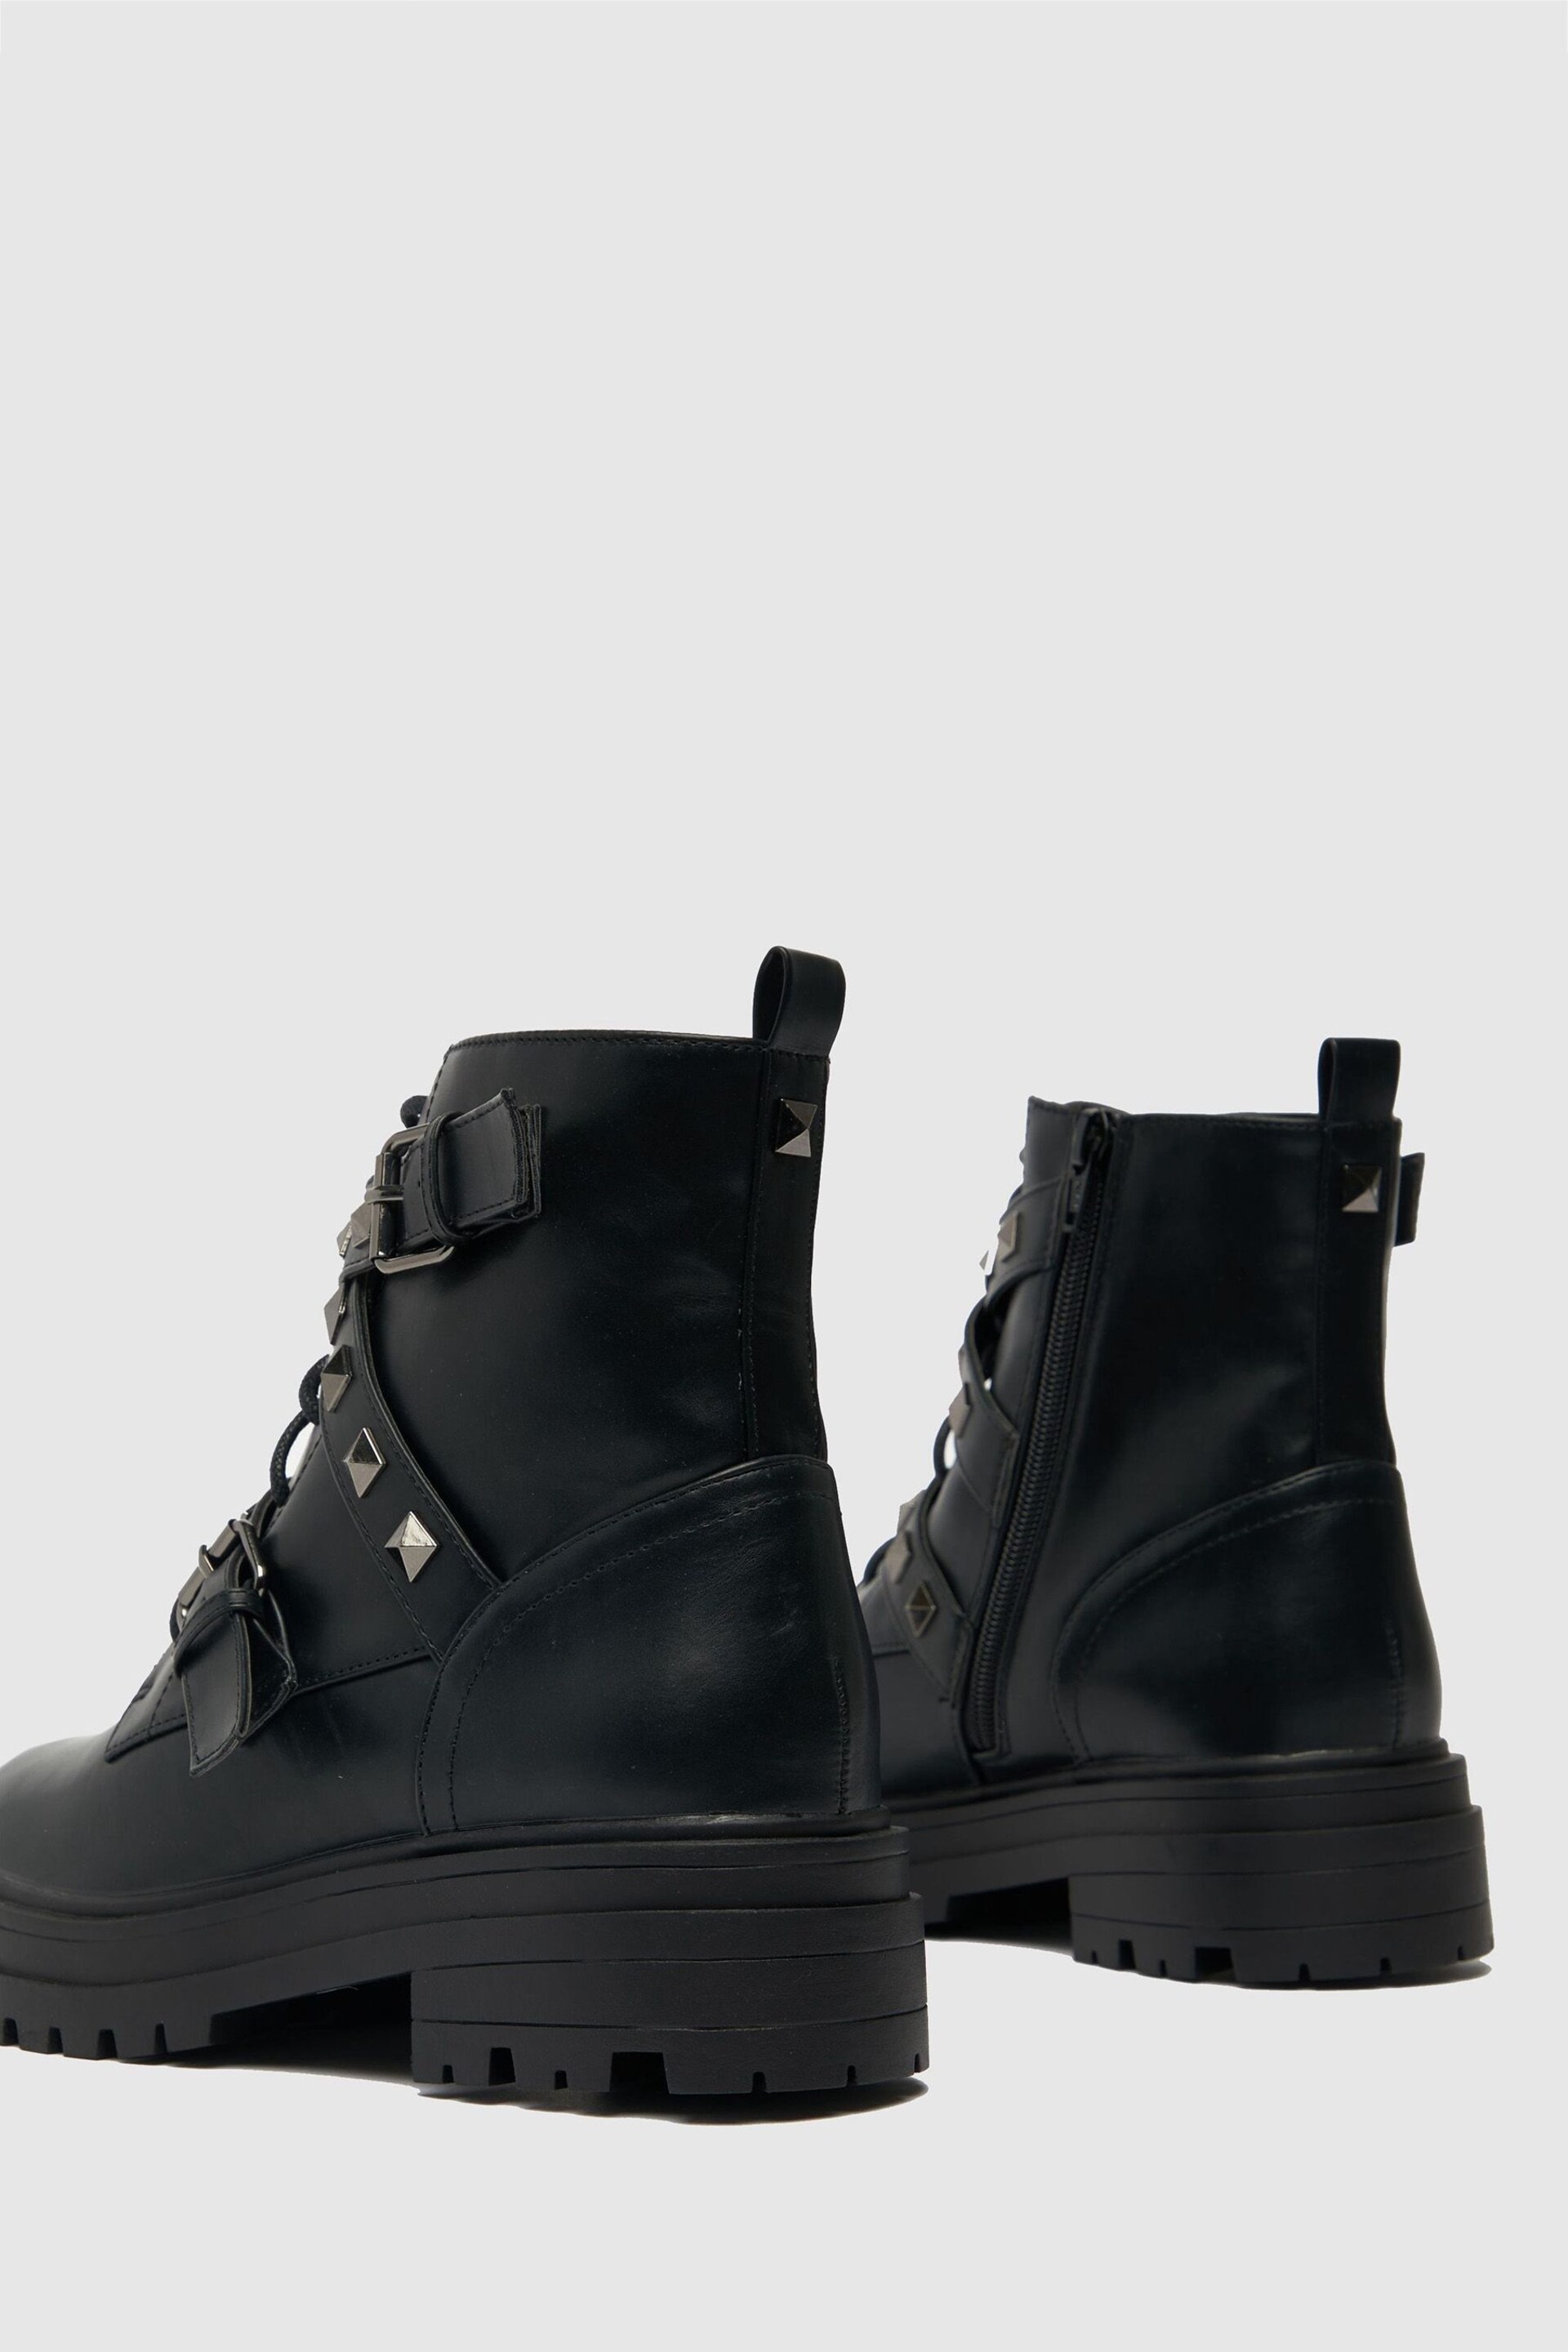 Schuh Arabella Black Hardware Lace-Up Boots - Image 4 of 4